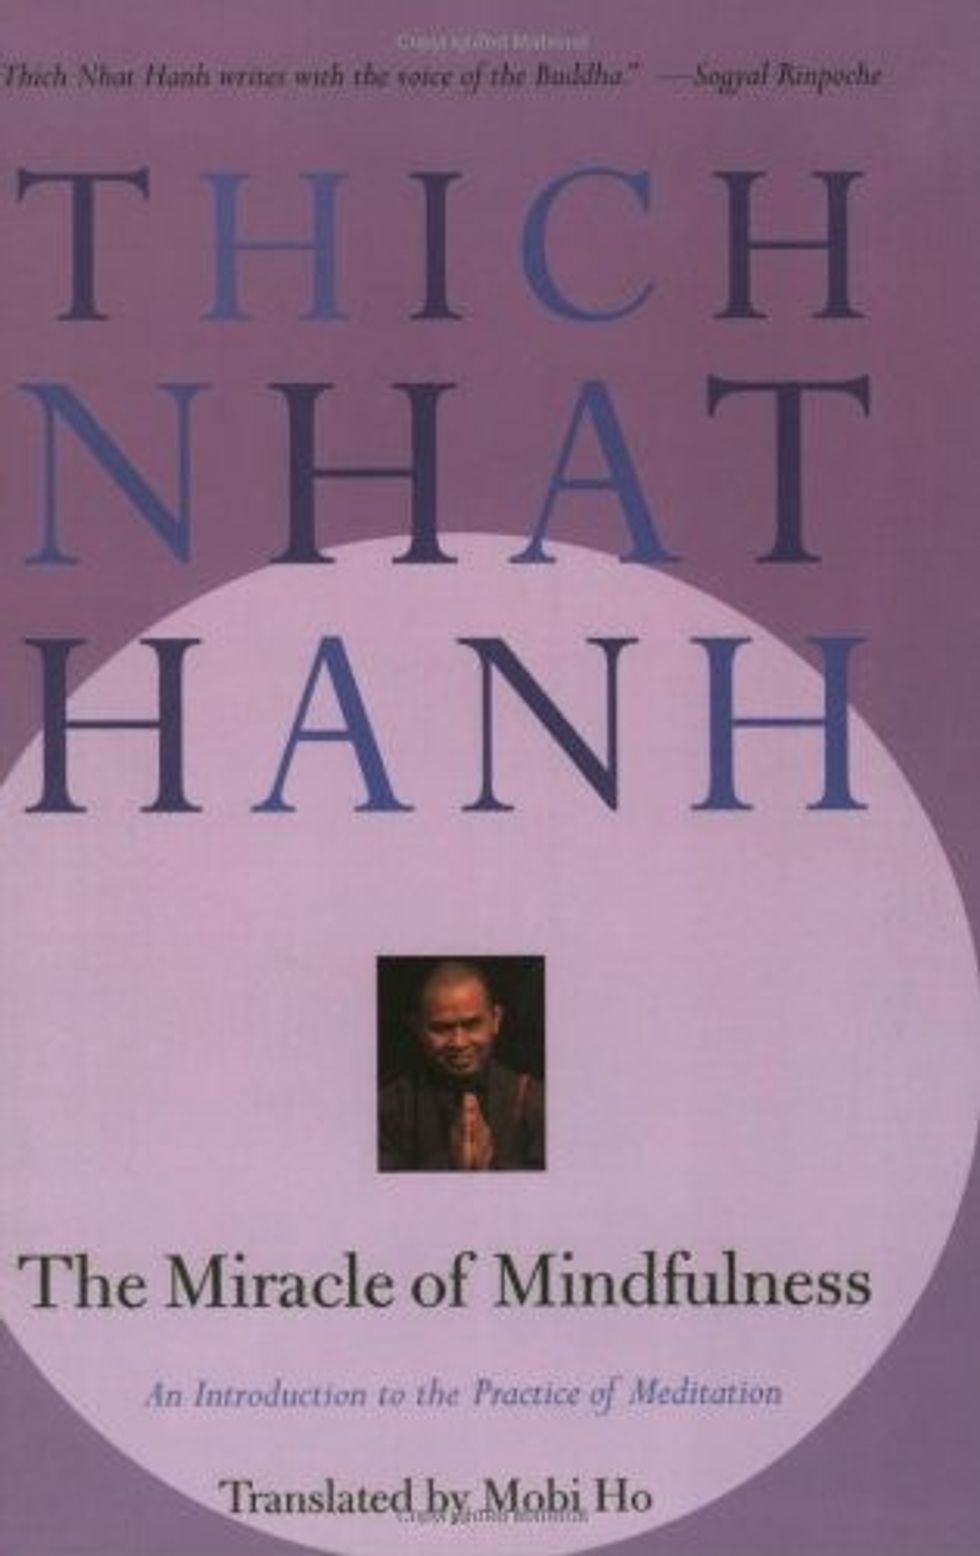 The-Miracle-of-Mindfulness-meditation-book-Thich-Nhat-Hanh